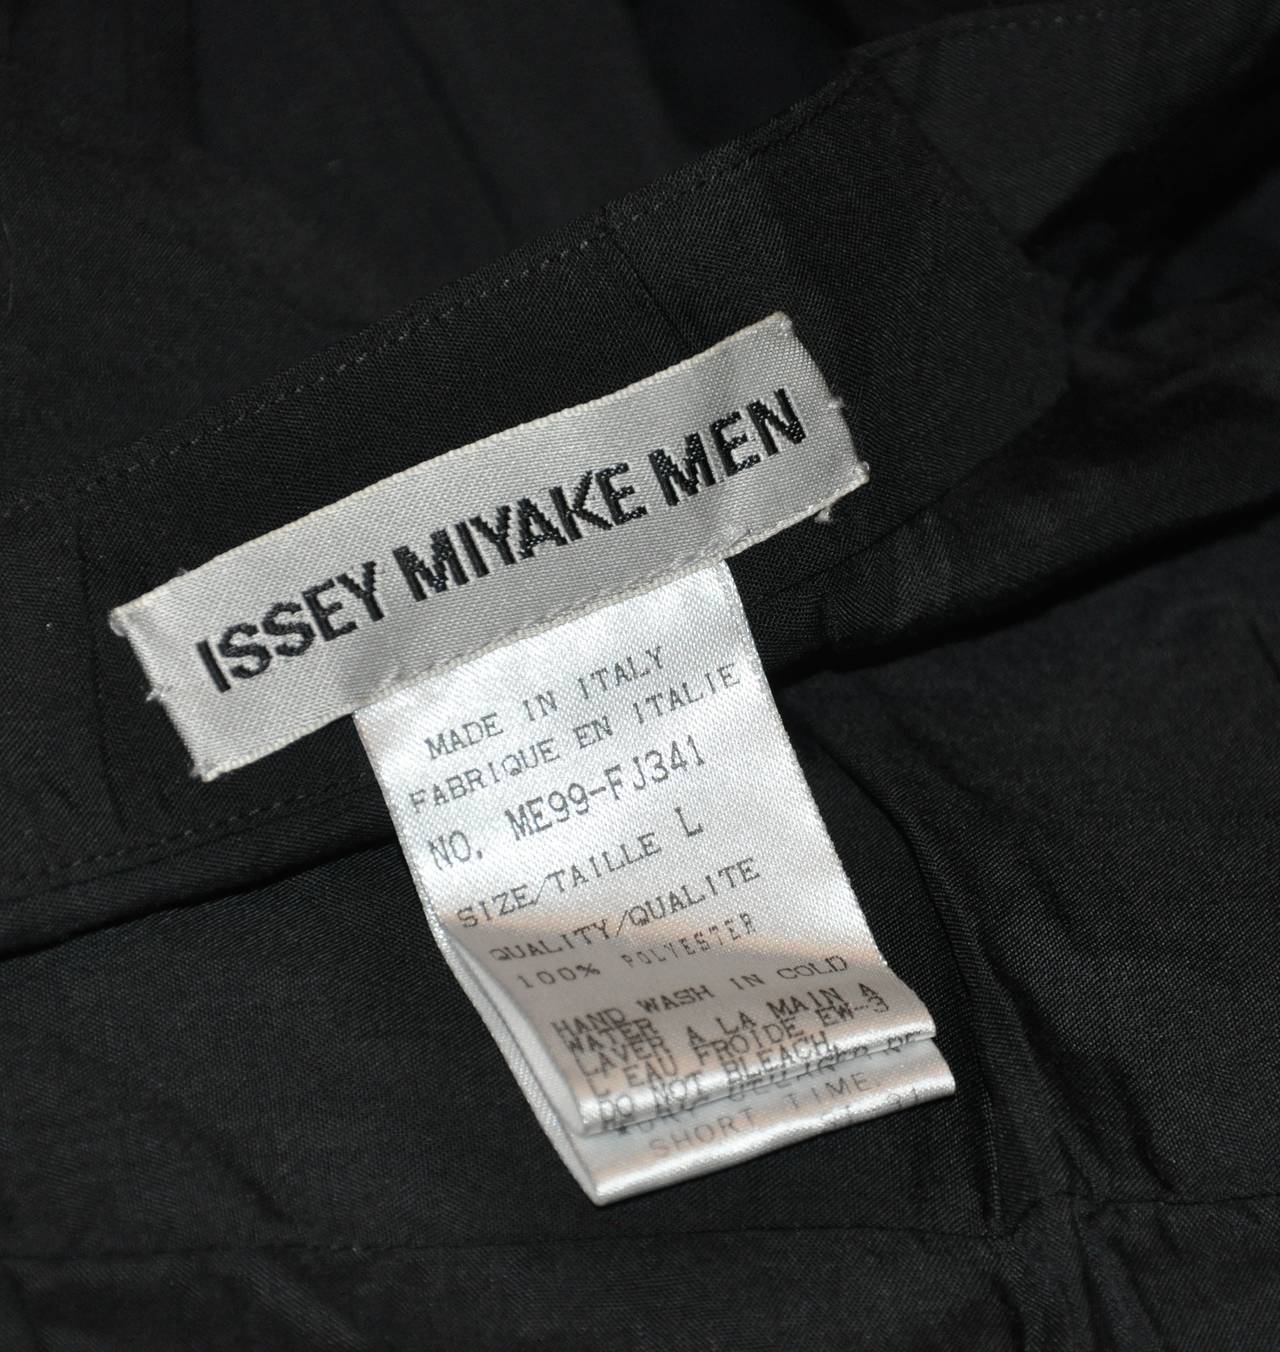 Issey Miyake Men's Black Accordian Shirt with Mother-of-Pearl Accent ...